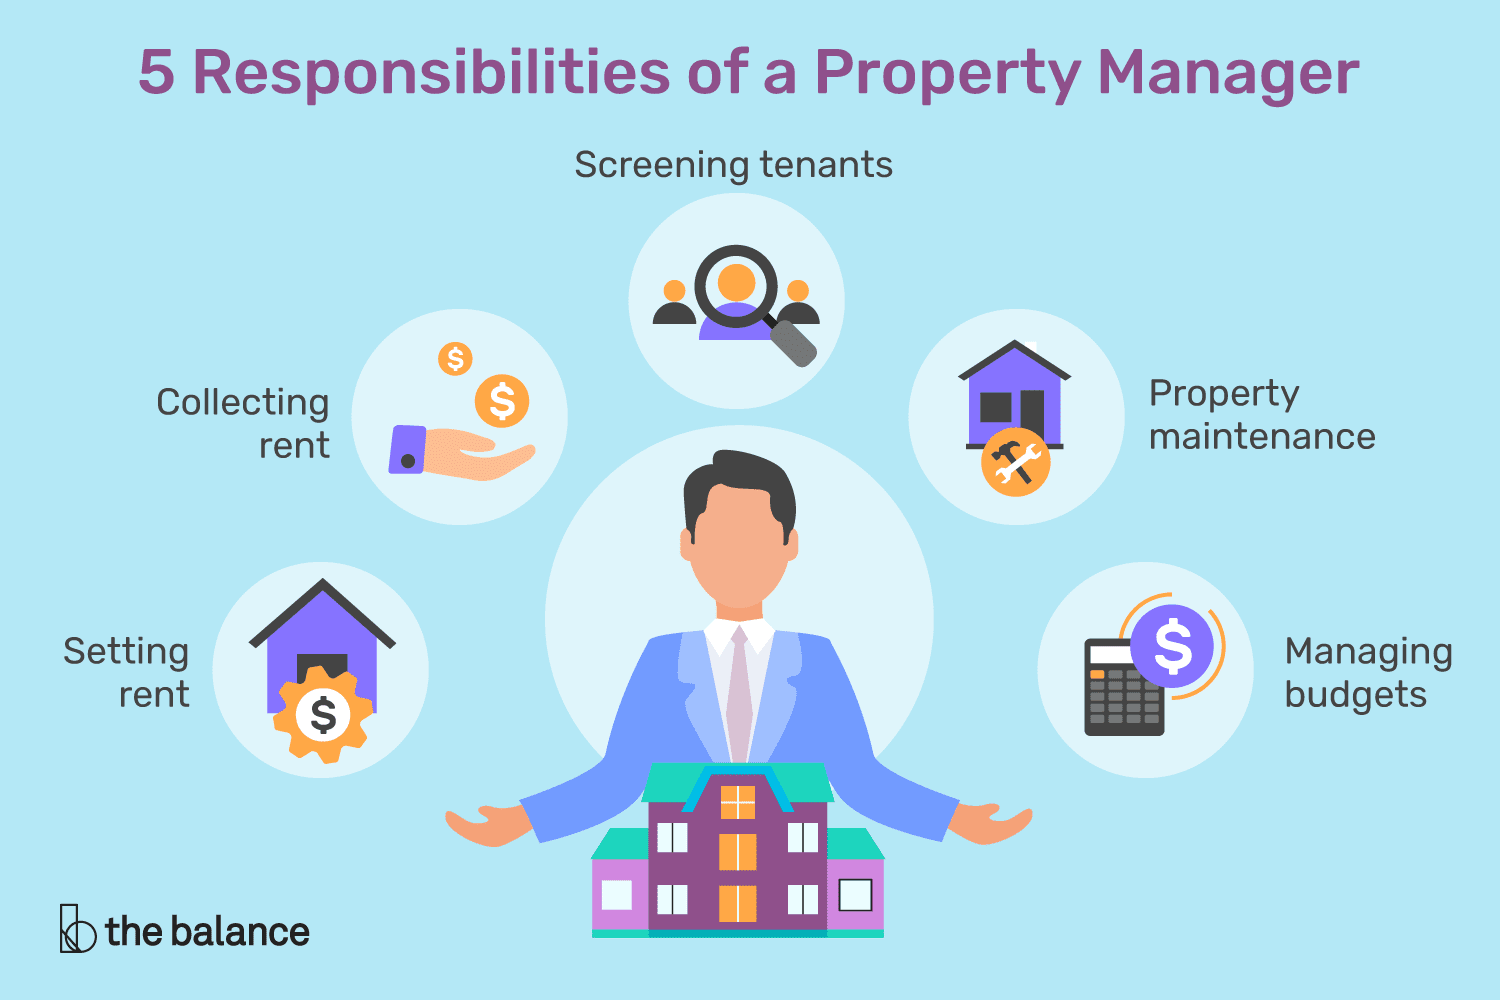 How Can I Become A Responsible Homeowner And Manage My Property Effectively? (Maintenance And Upkeep)